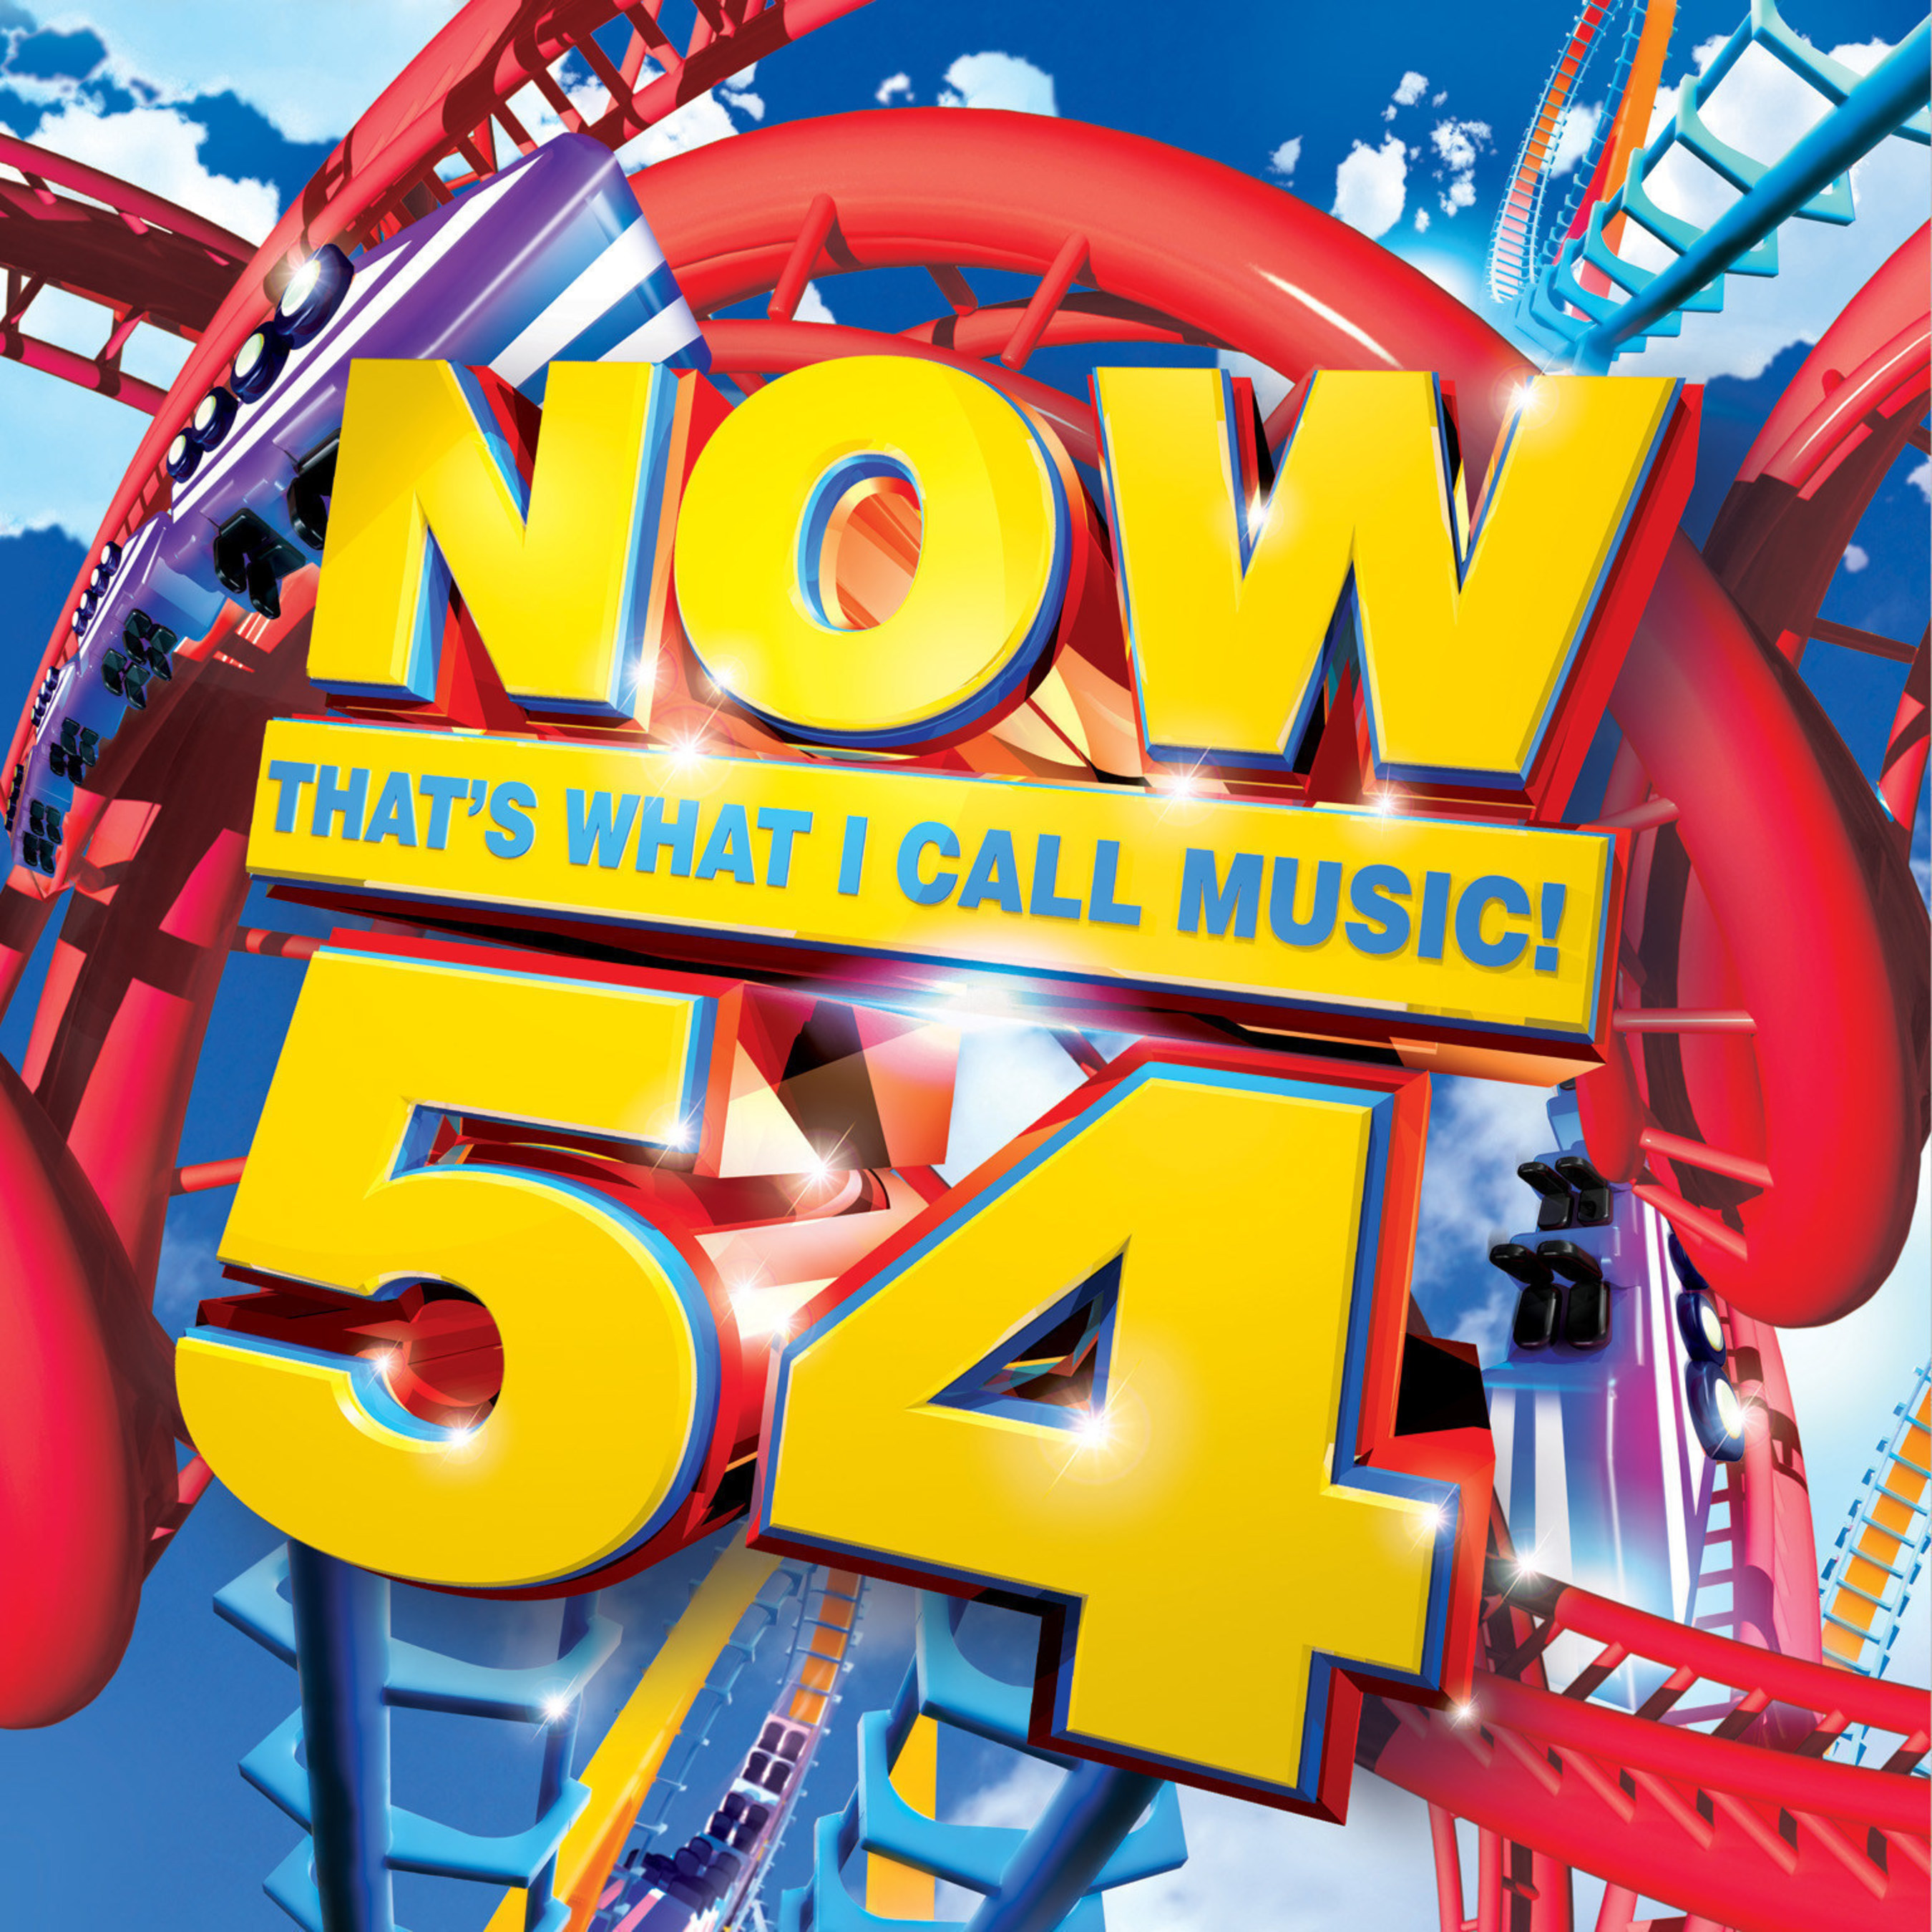 The world's best-selling, multi-artist album series, NOW That's What I Call Music!, has gathered today's biggest hits for 'NOW That's What I Call Music! Vol. 54,' to be released May 4.  On the same date, NOW Music will release 'NOW That's What I Call #1's,' celebrating many of the U.S. series' biggest chart-topping hits. 'NOW 54' and 'NOW #1's' are both available now for CD and digital preorder. www.nowthatsmusic.com